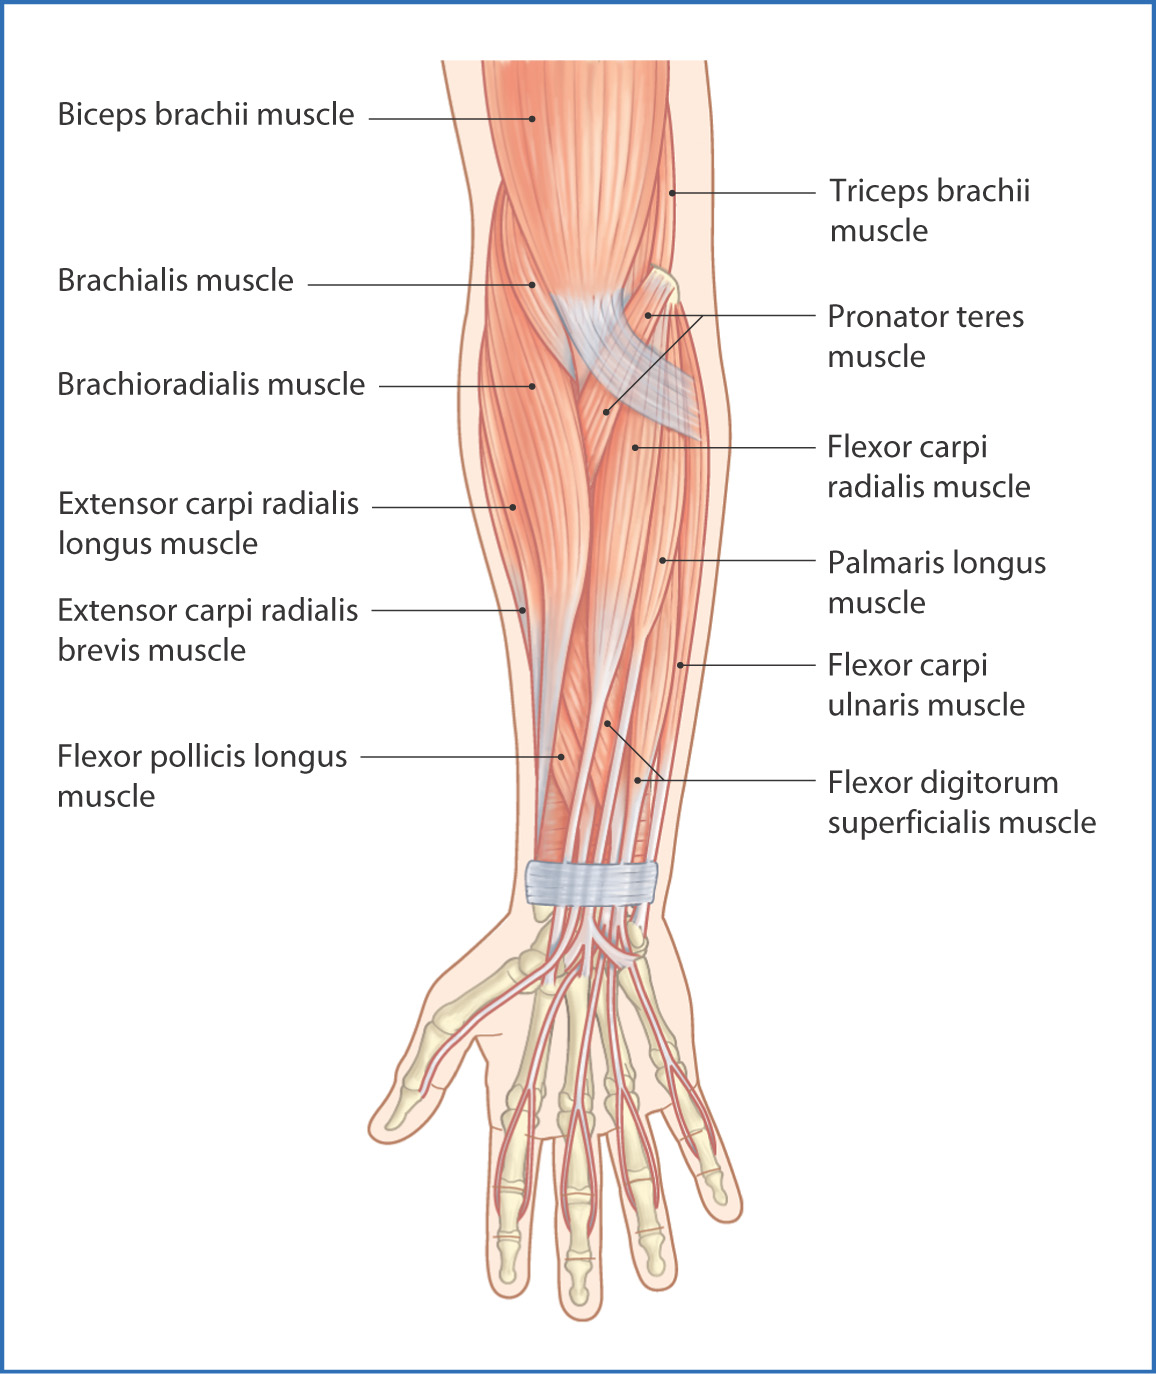 Muscles Of The Anterior Forearm Superficial View Learn Muscles vlr.eng.br